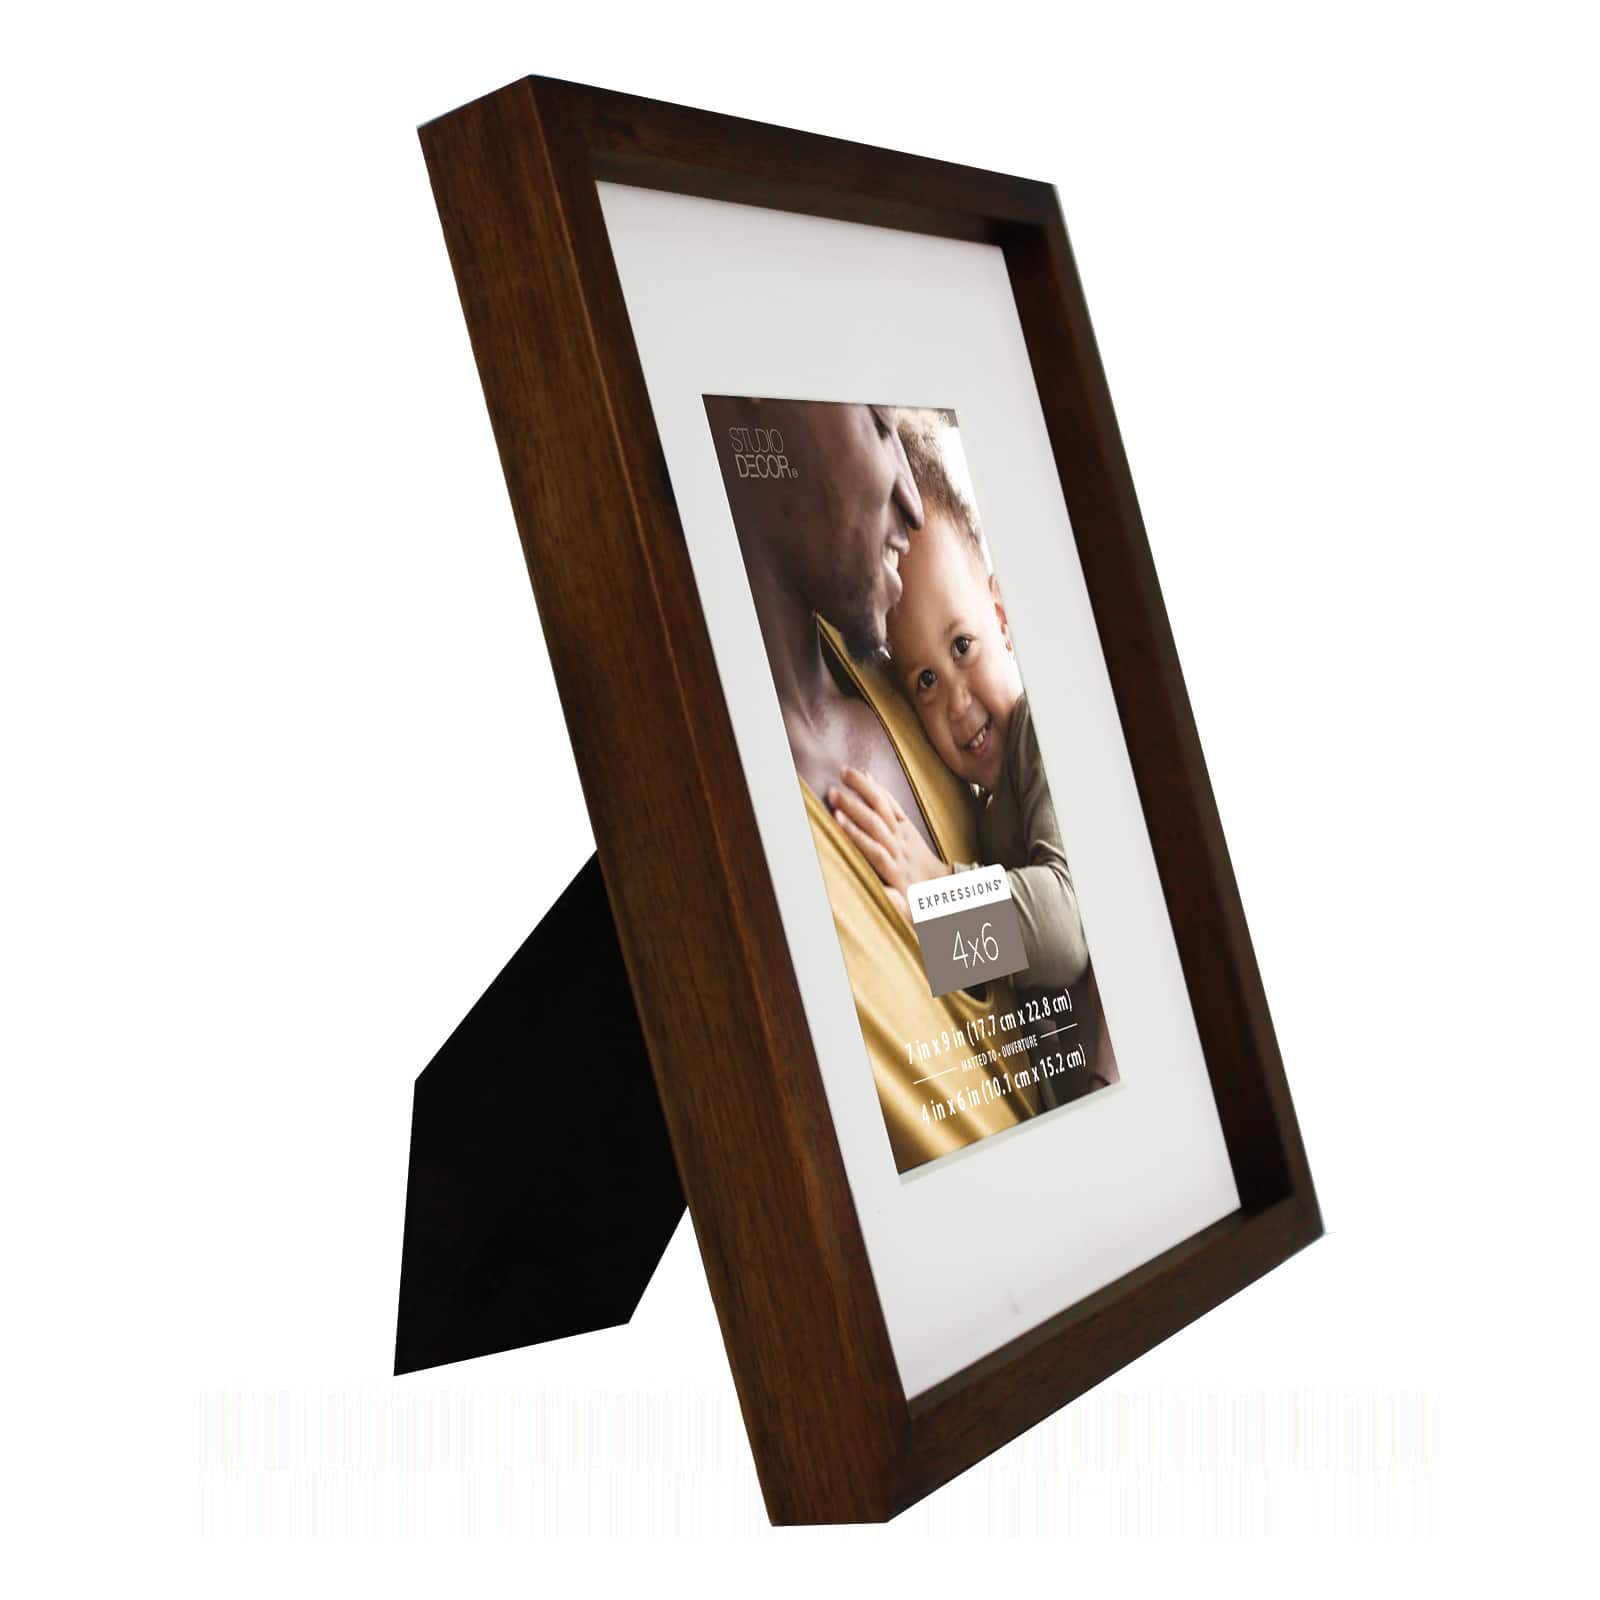 6-Piece Walnut Wood 11x11 Gallery Wall Picture Frame Set + Reviews